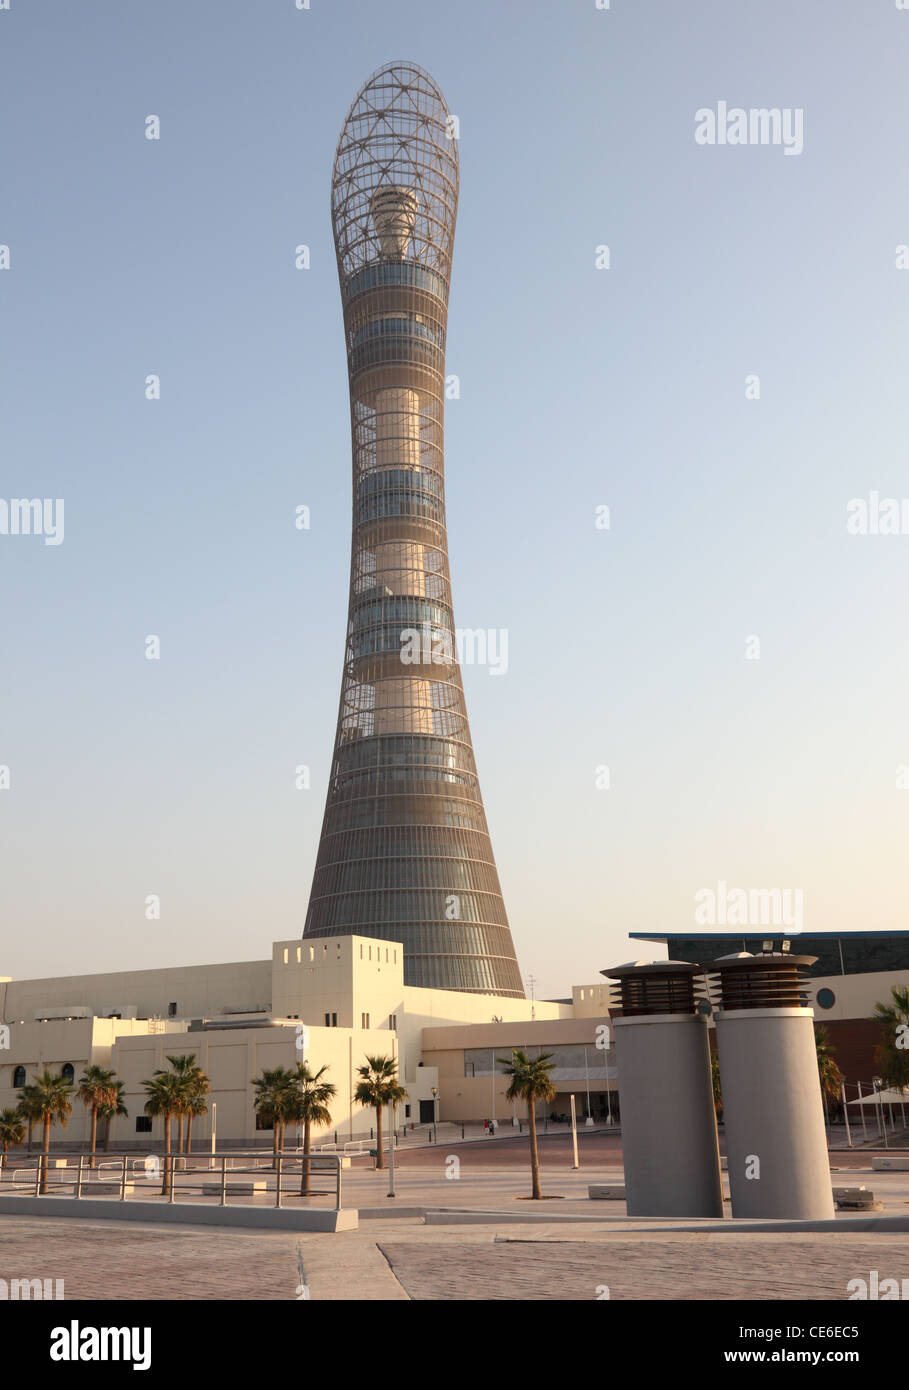 The Aspire tower in Doha Sports City Complex, Qatar Stock Photo